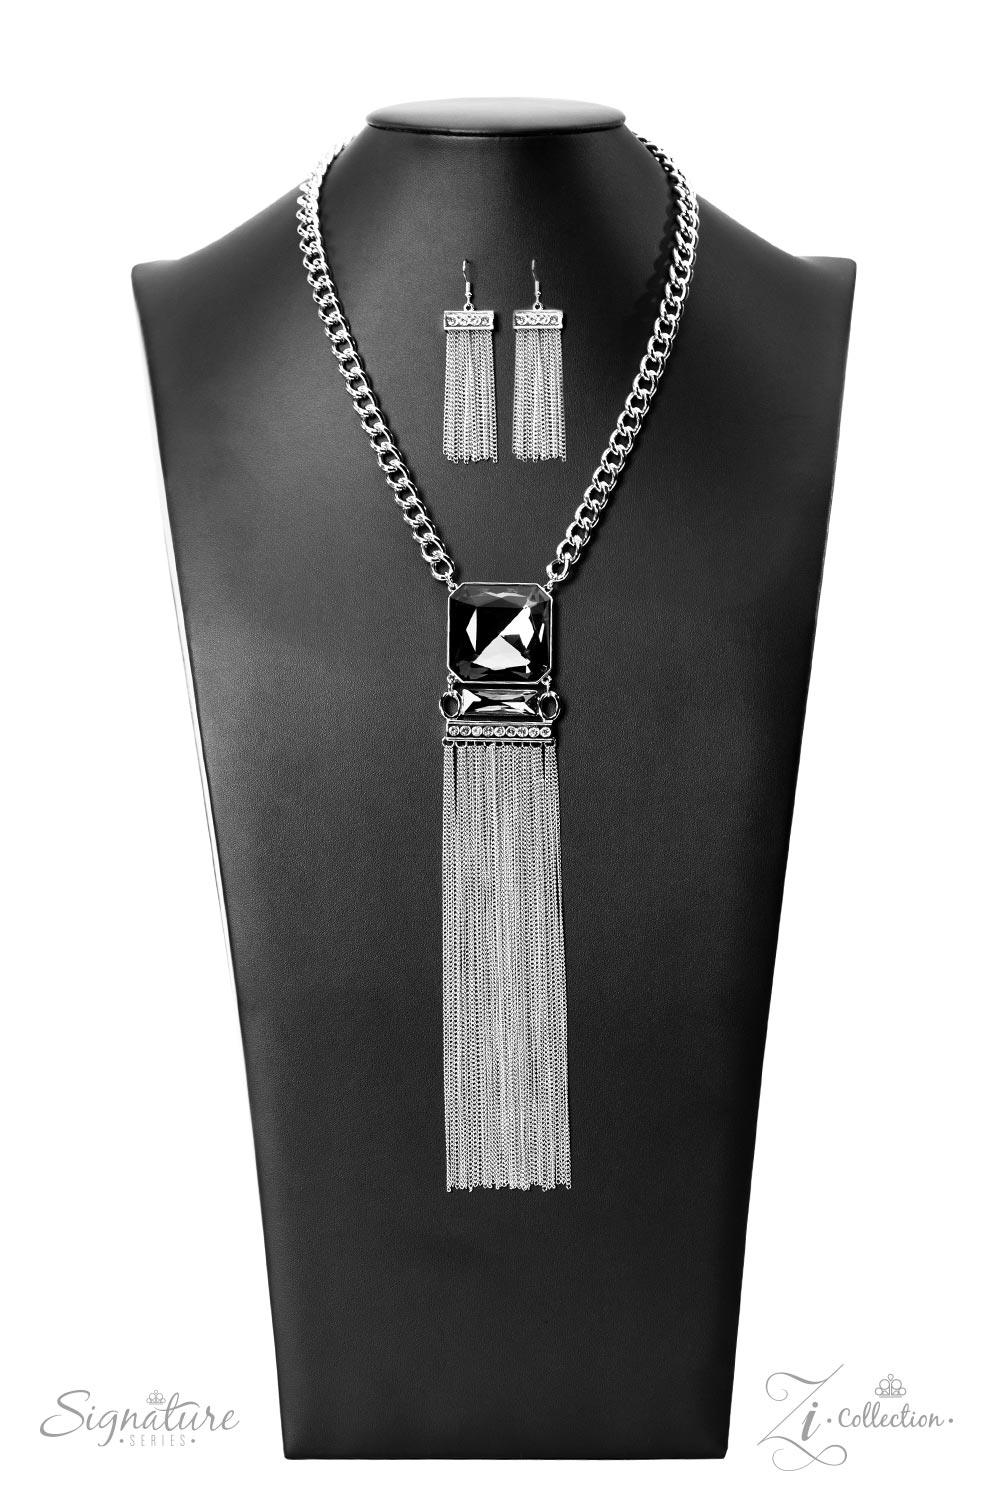 Paparazzi Accessories The Hope A dramatically oversized, smoky, Asscher cut gem sits boldly at the bottom of a thick silver chain, creating a majestic focal point. An emerald cut gem in the same smoky hue connects to the bottom of the large centerpiece, f